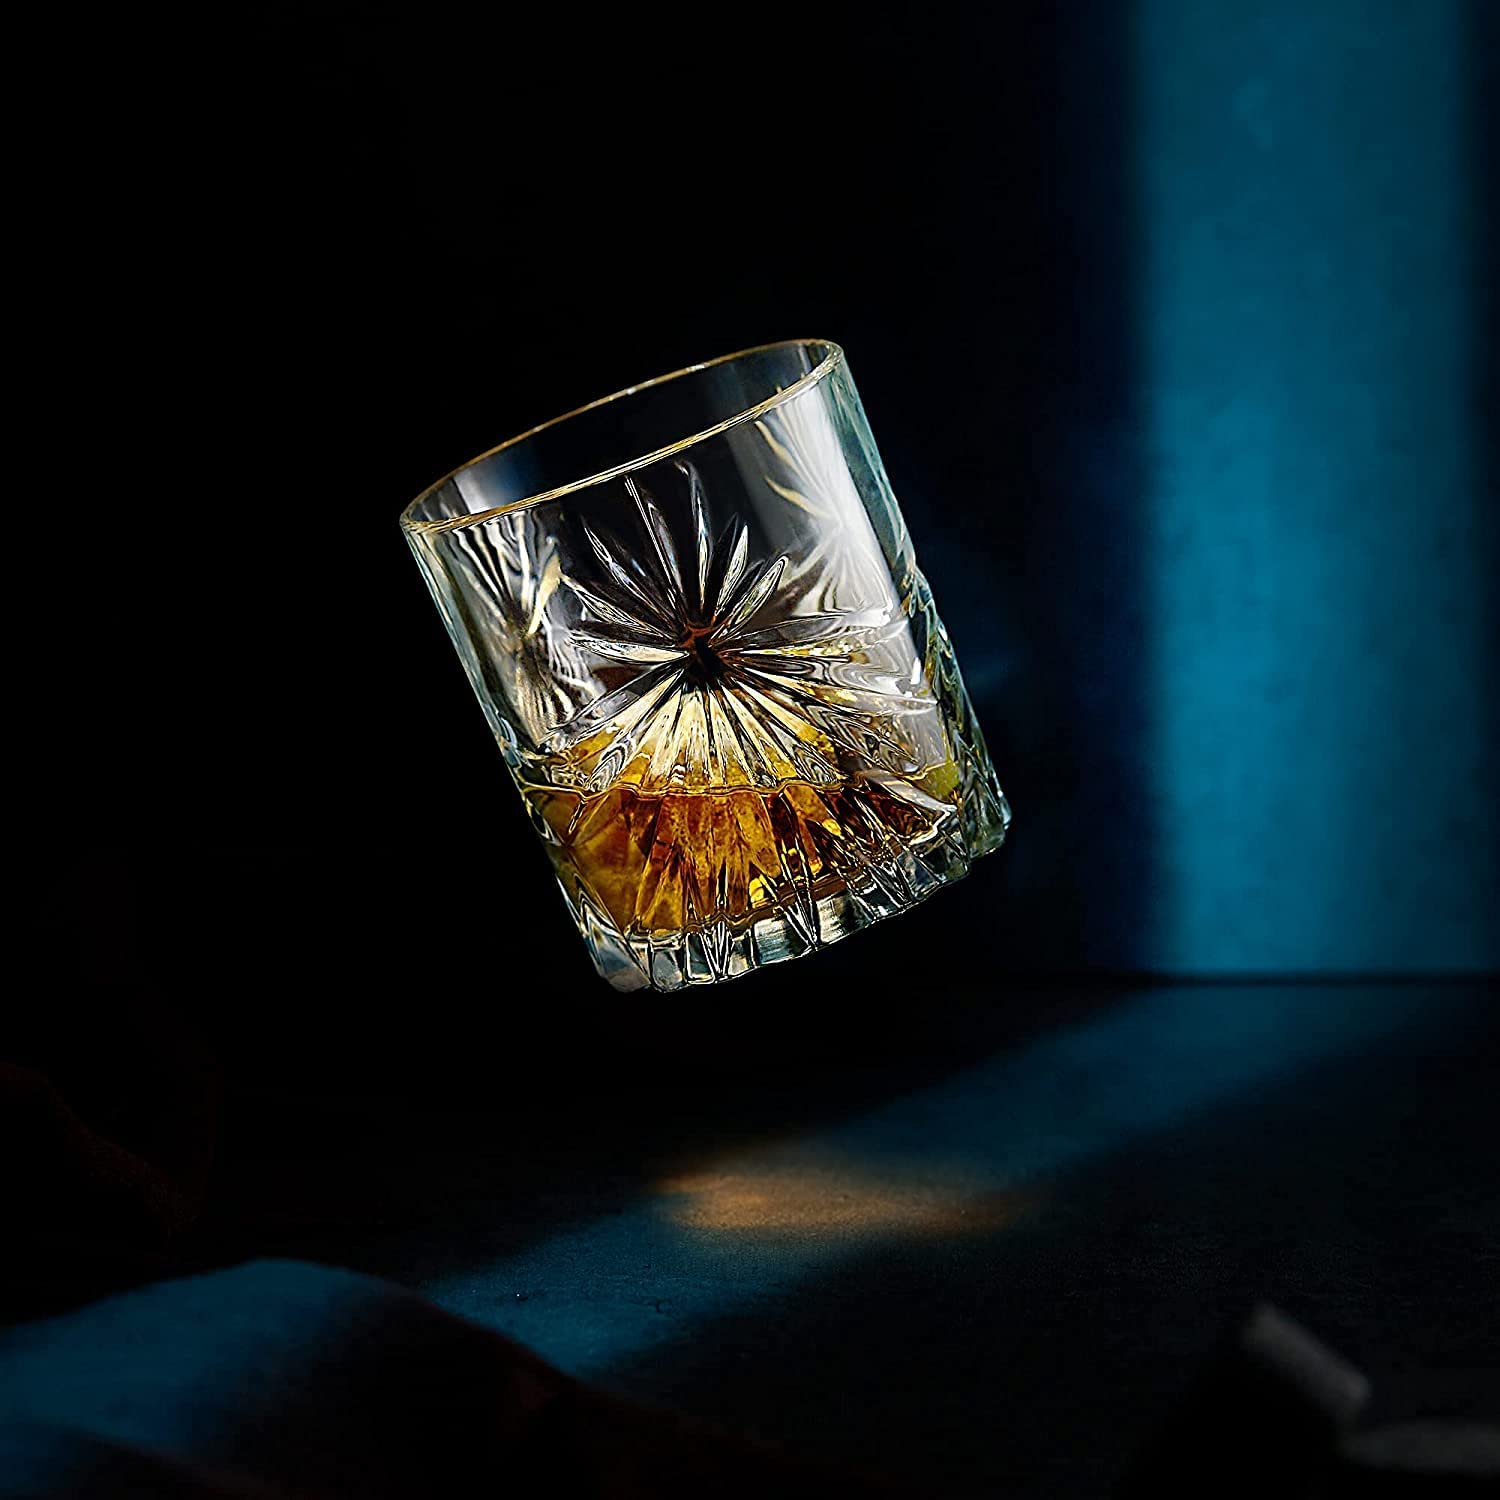 The Connoisseur's Set - Soleil Glass Edition by R.O.C.K.S. Whiskey Chilling Stones